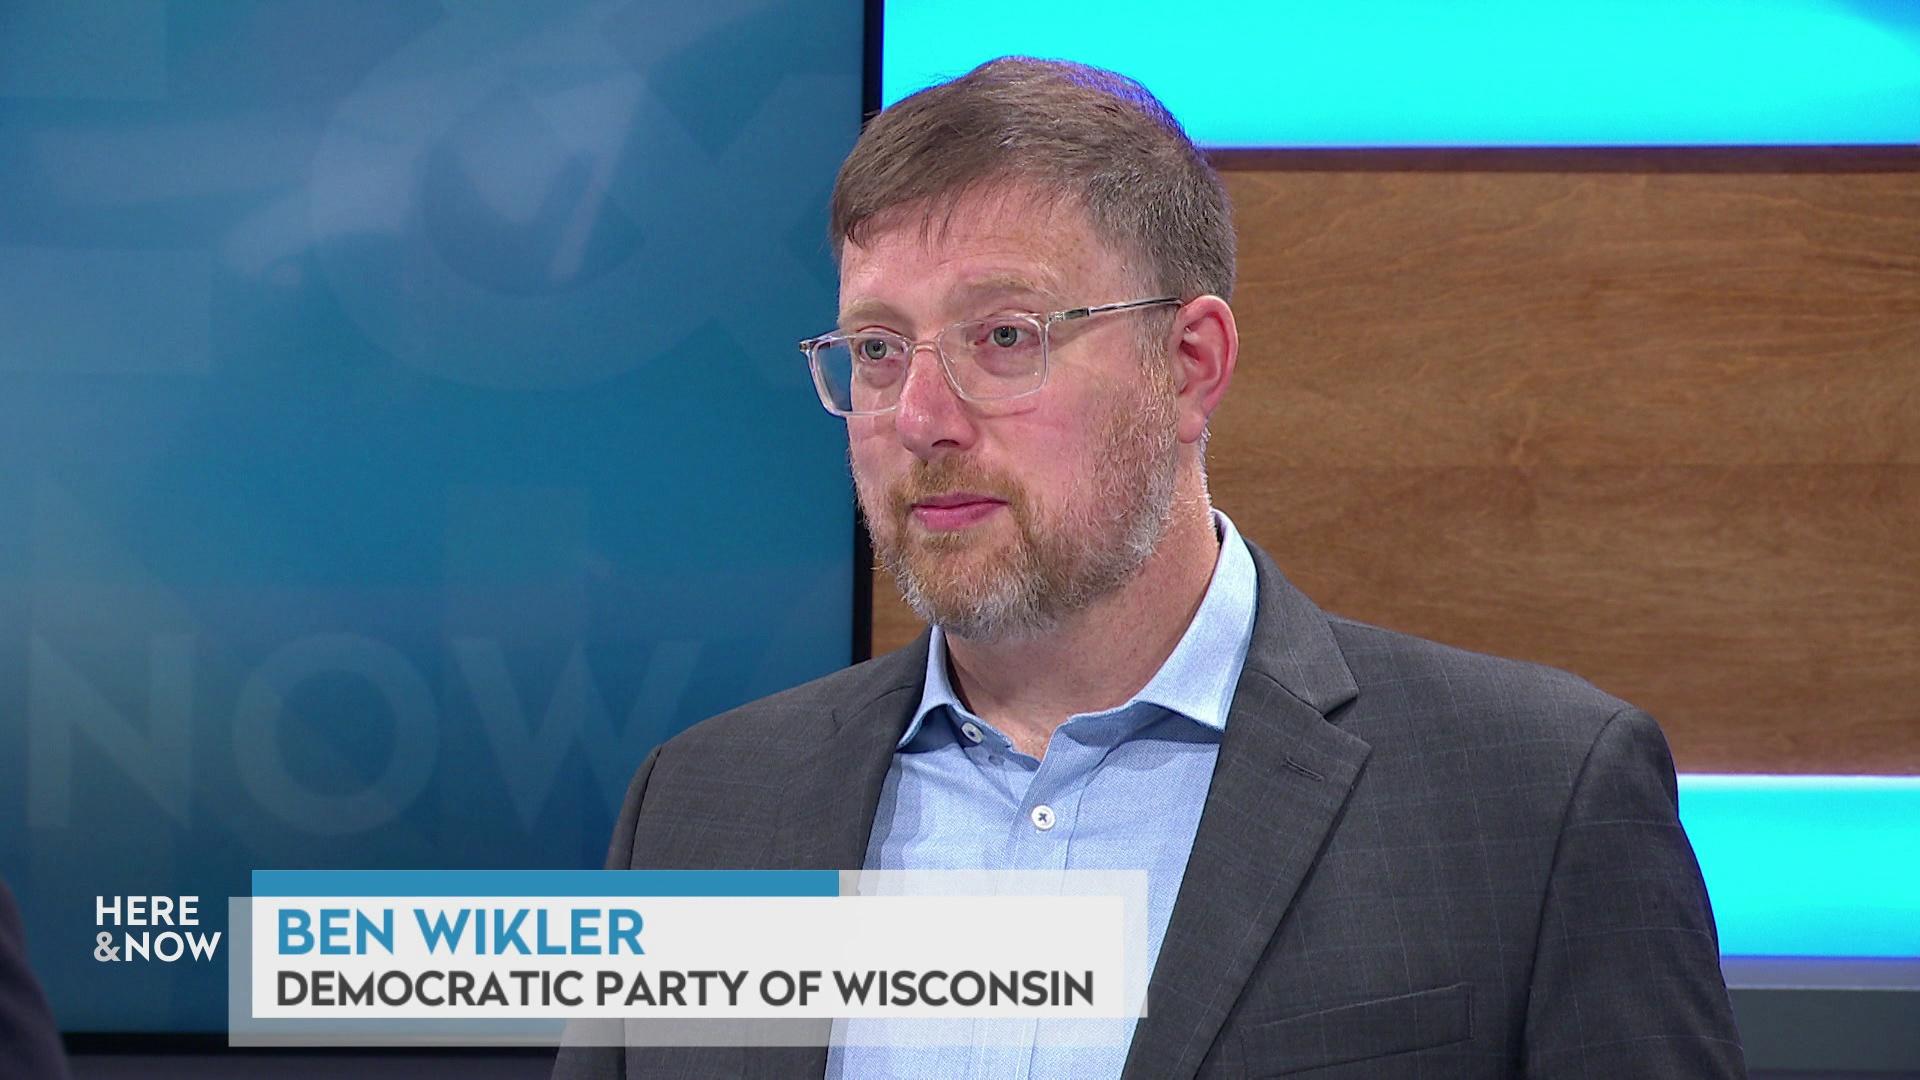 A still image shows Ben Wikler seated at the 'Here & Now' set featuring wood paneling, with a graphic at bottom reading 'Ben Wikler' and 'Democratic Party of Wisconsin.'